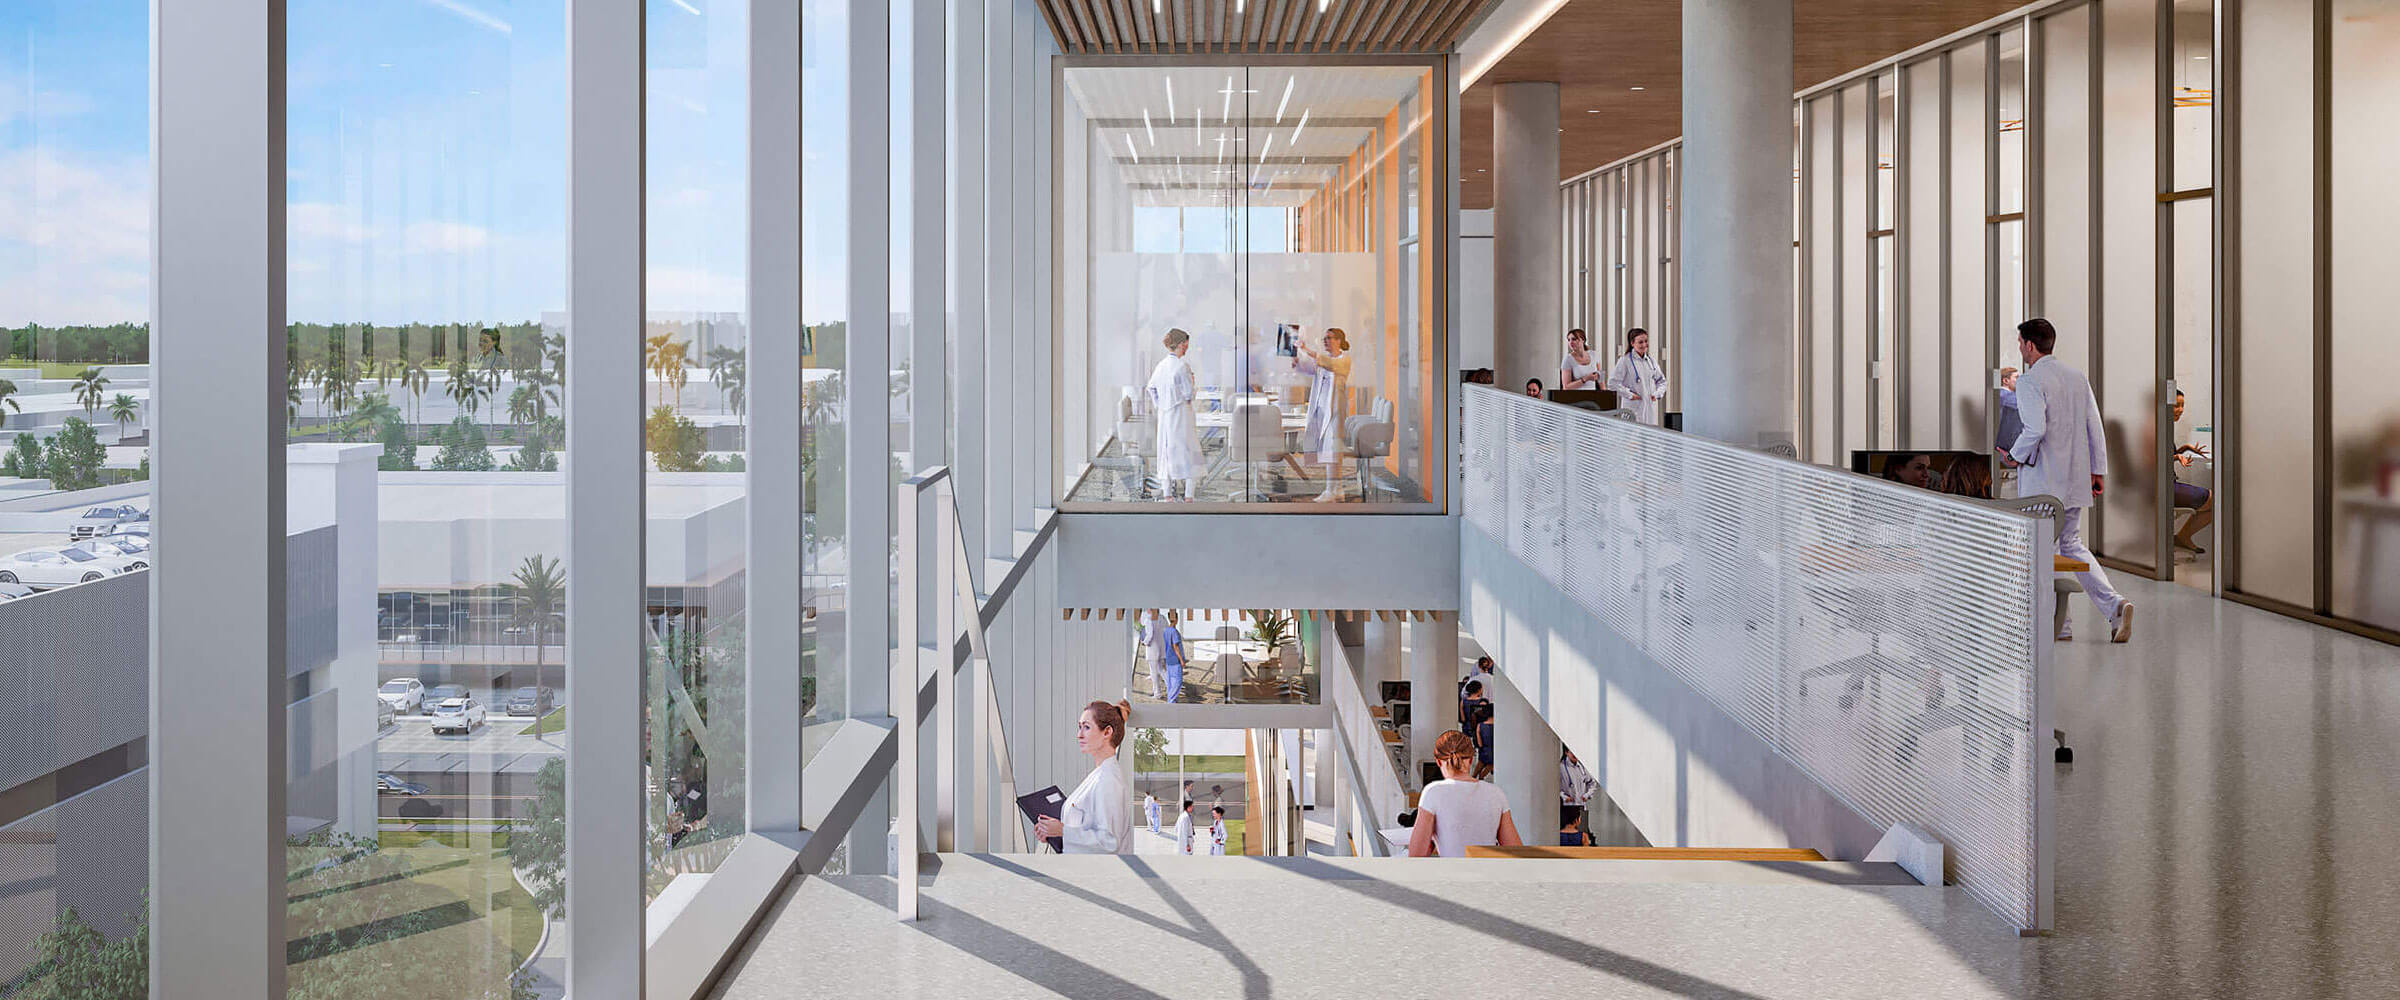 Connection-Staircase Architectural Rendering of UHealth at SoLé Mia in Aventura